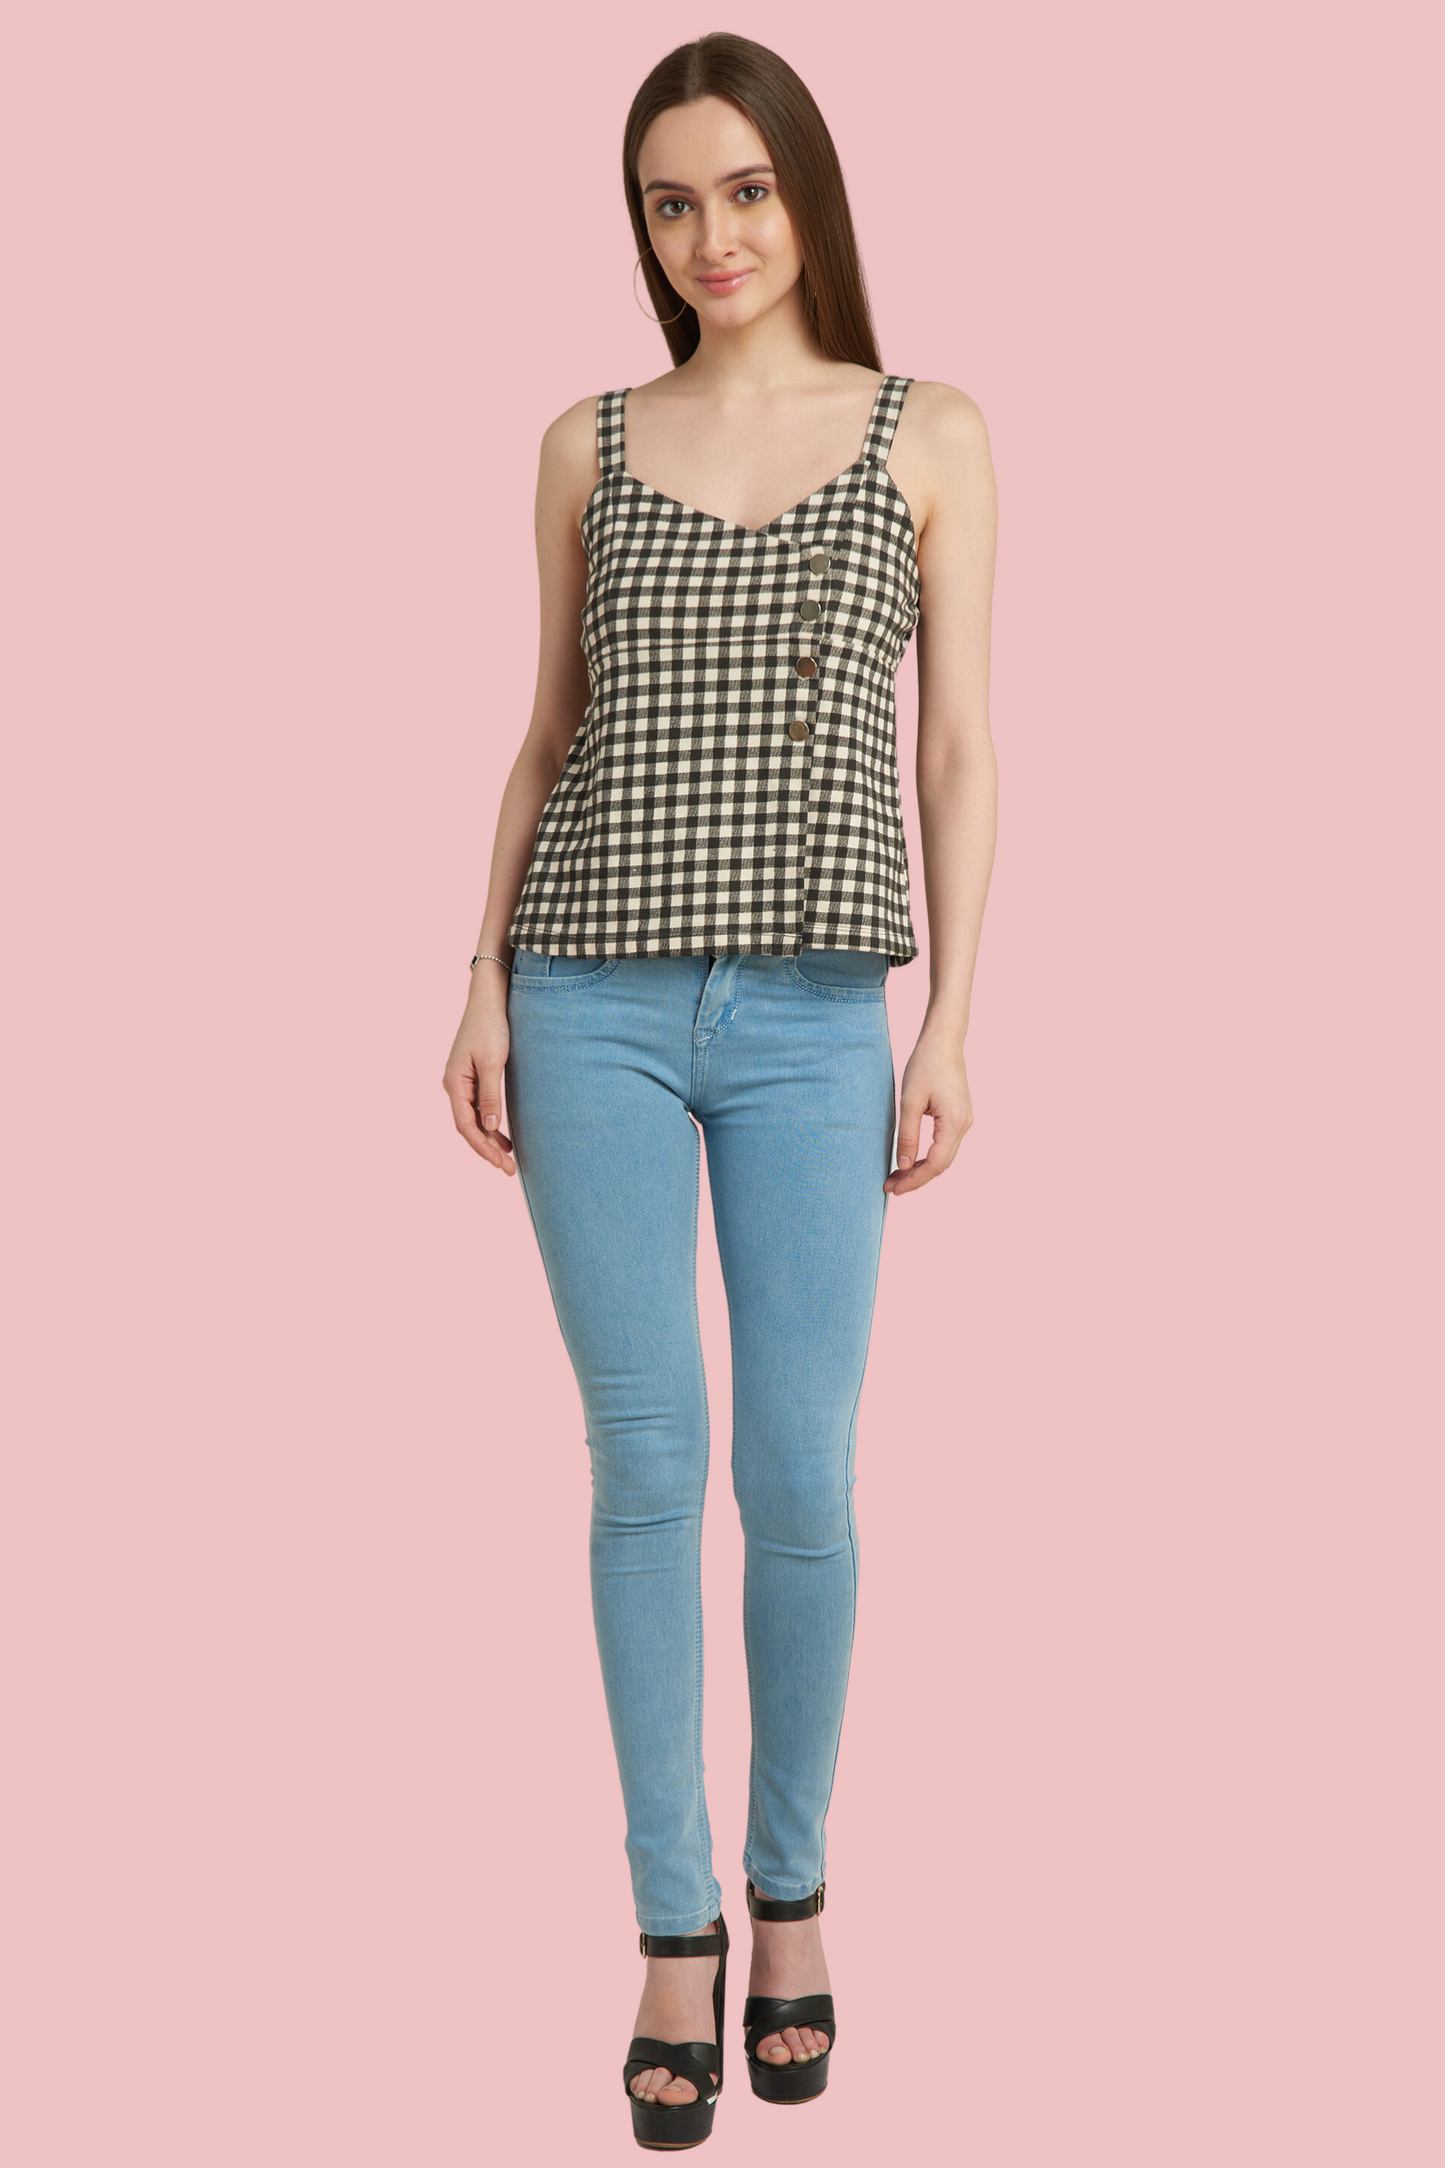 Gingham check patterned top